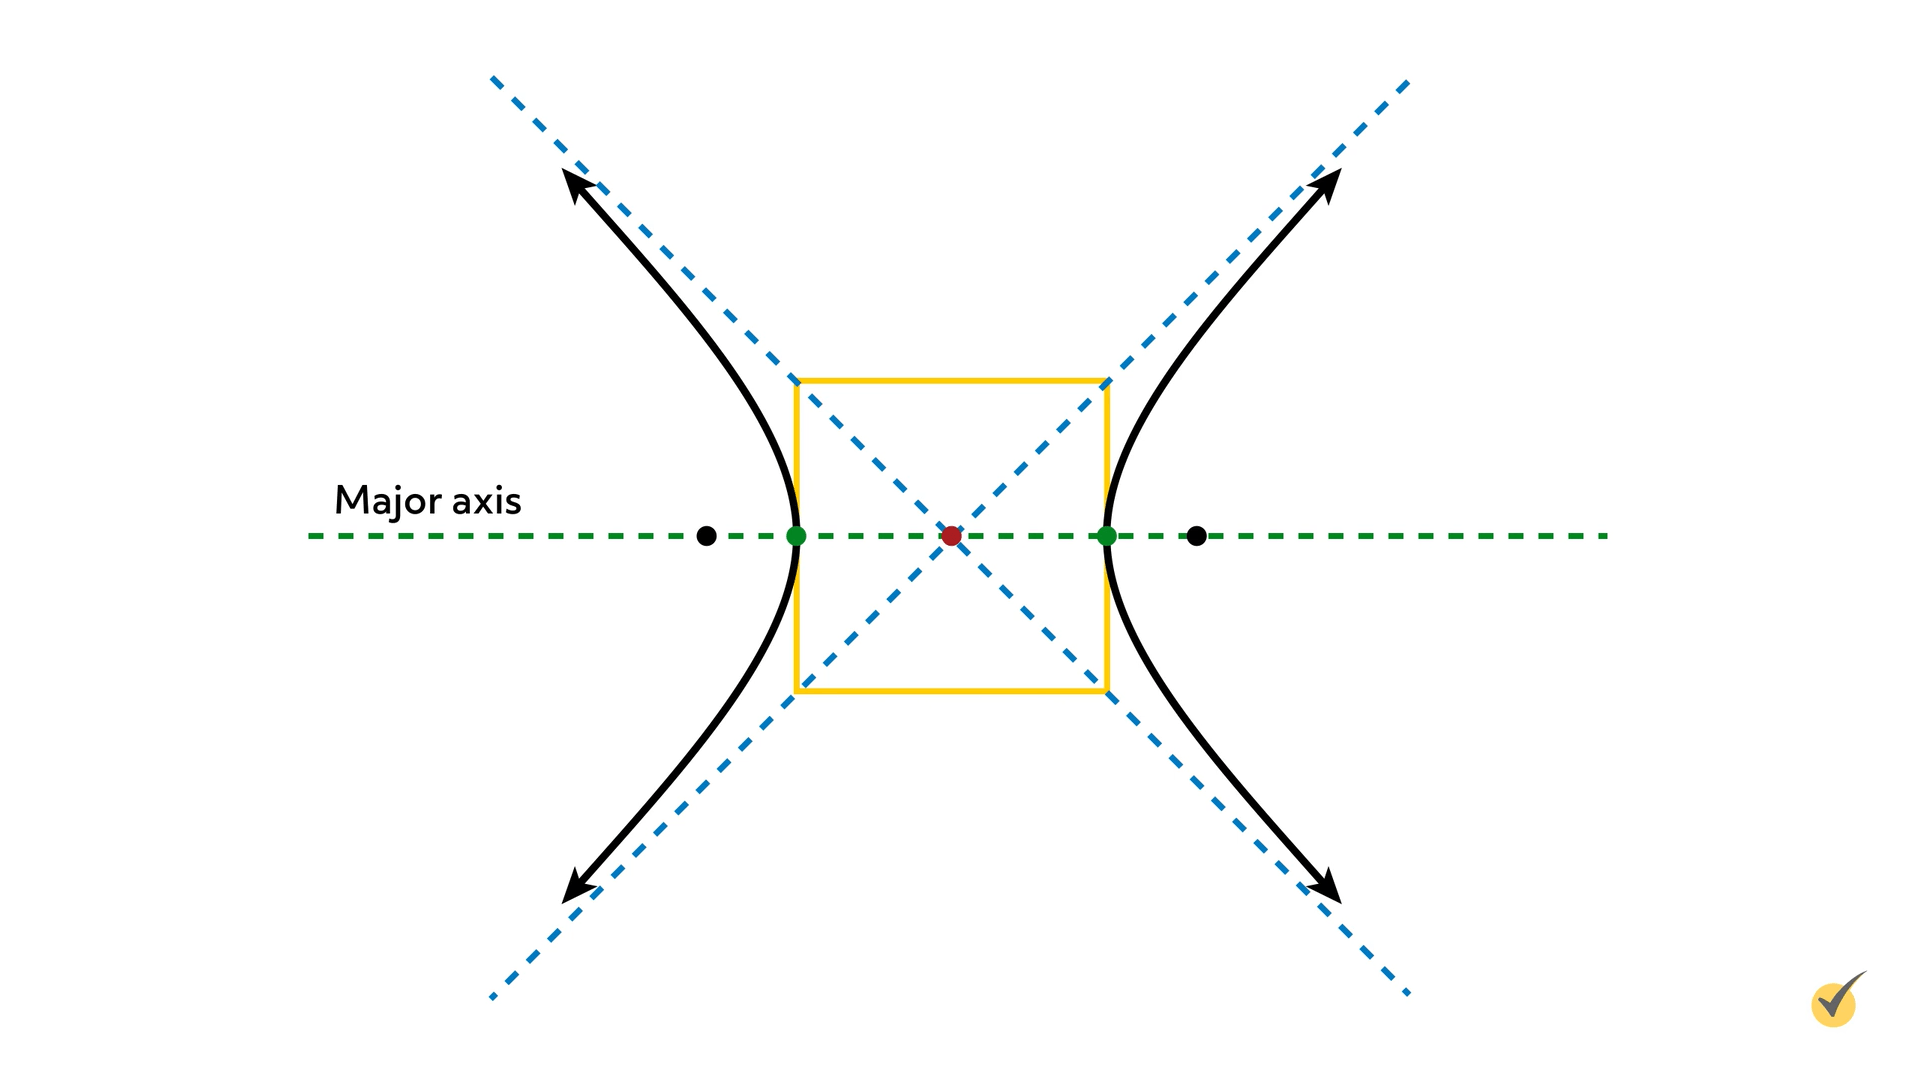 Image of a hyperbolas with the foci, vertexes, center point with perpendicular dashed lines showing the asymptote, and the major axis with 5 points.  